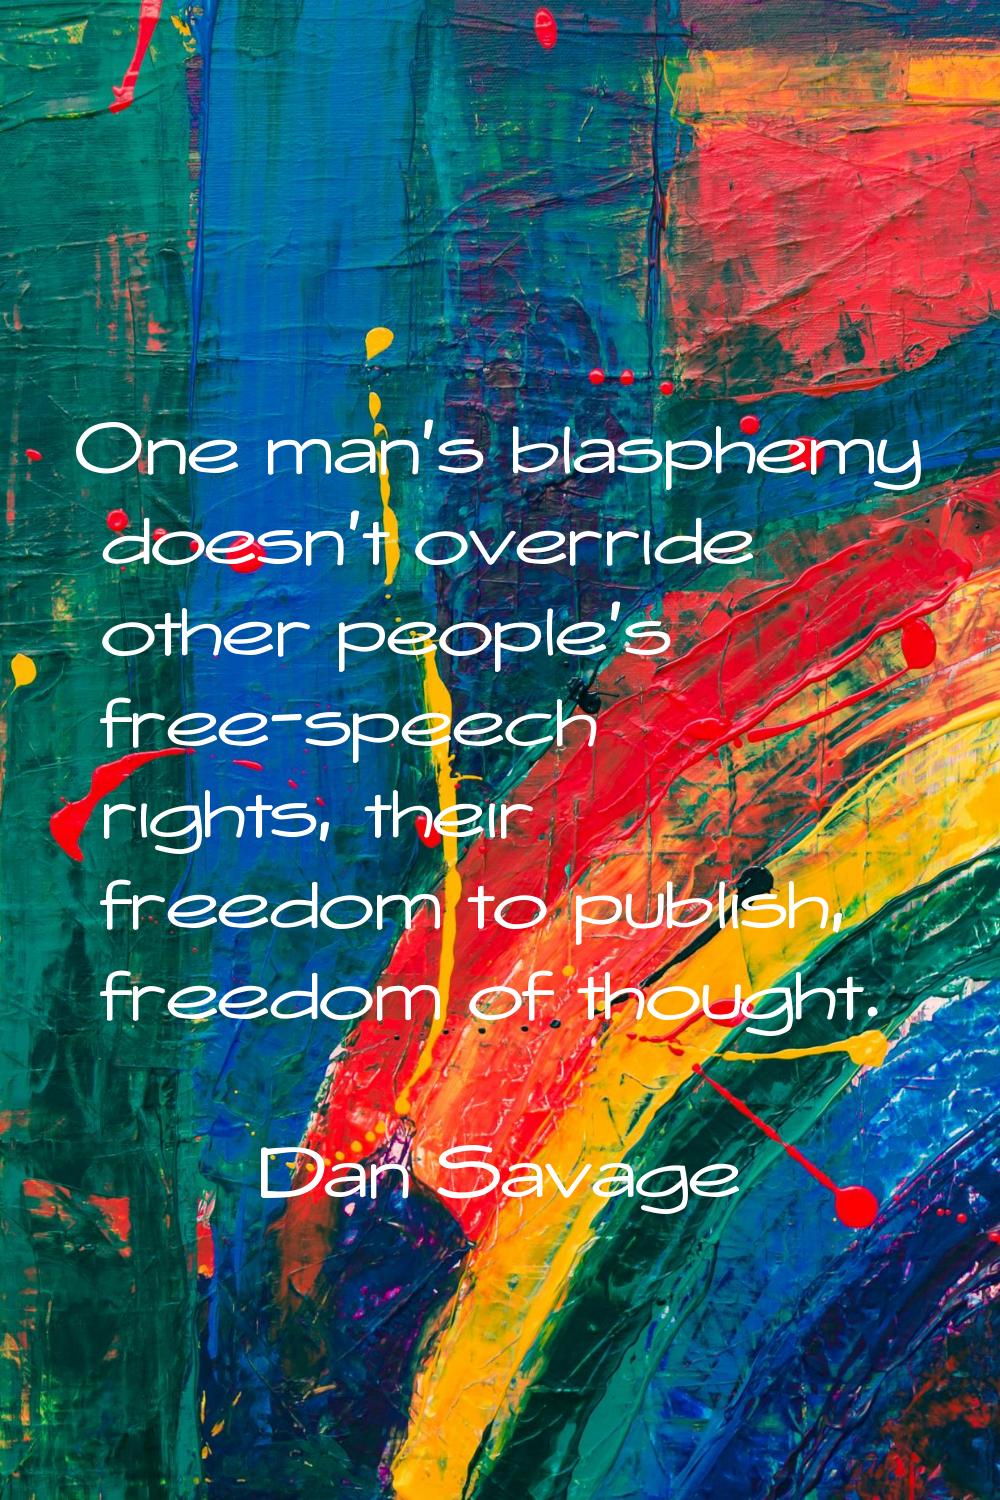 One man's blasphemy doesn't override other people's free-speech rights, their freedom to publish, f